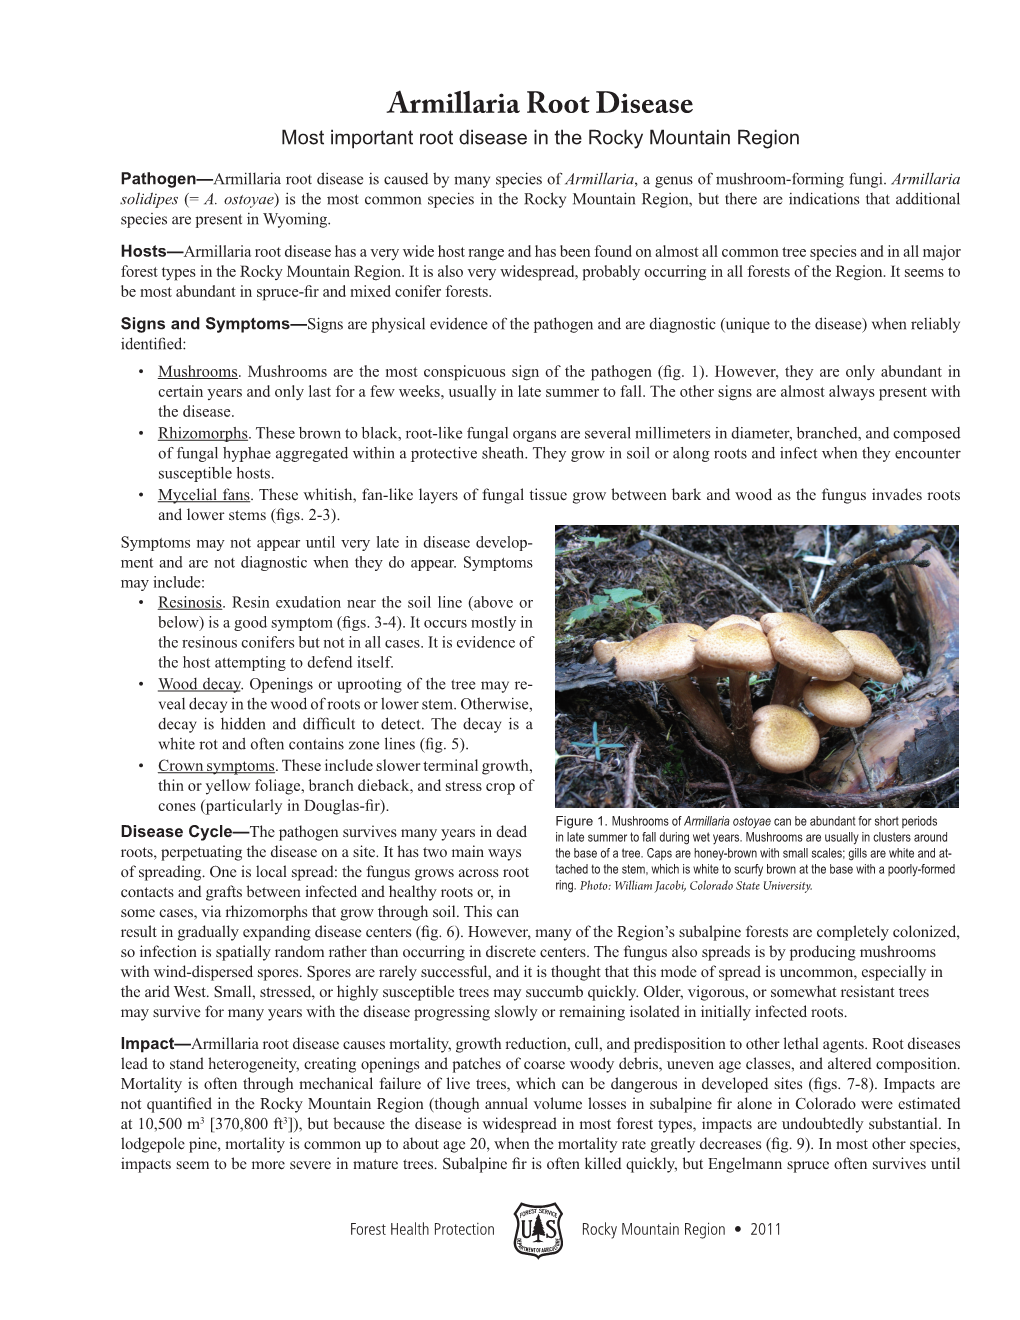 Armillaria Root Disease Most Important Root Disease in the Rocky Mountain Region